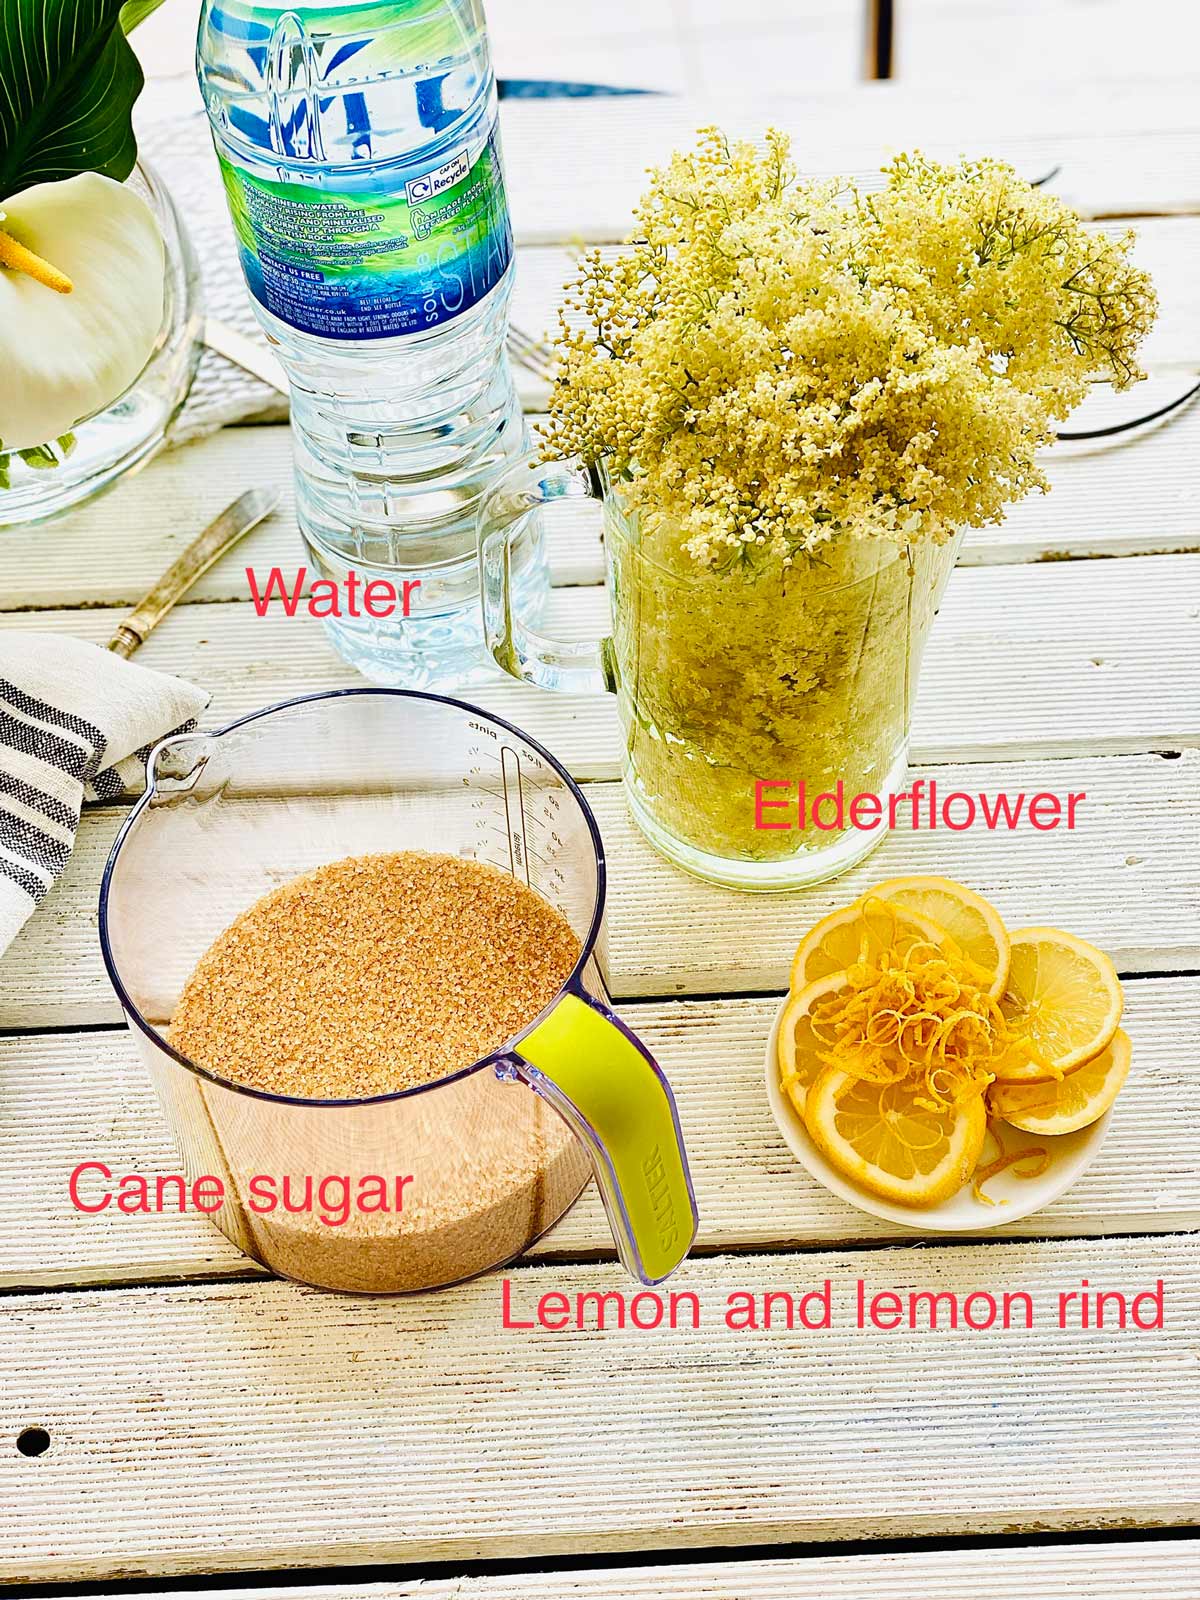 Ingredients needed for the elderflower cordial - cane sugar in a jug, lemon slices and lemon rind on the little white plate, elderflower in a tall jug and a bottle of spring water